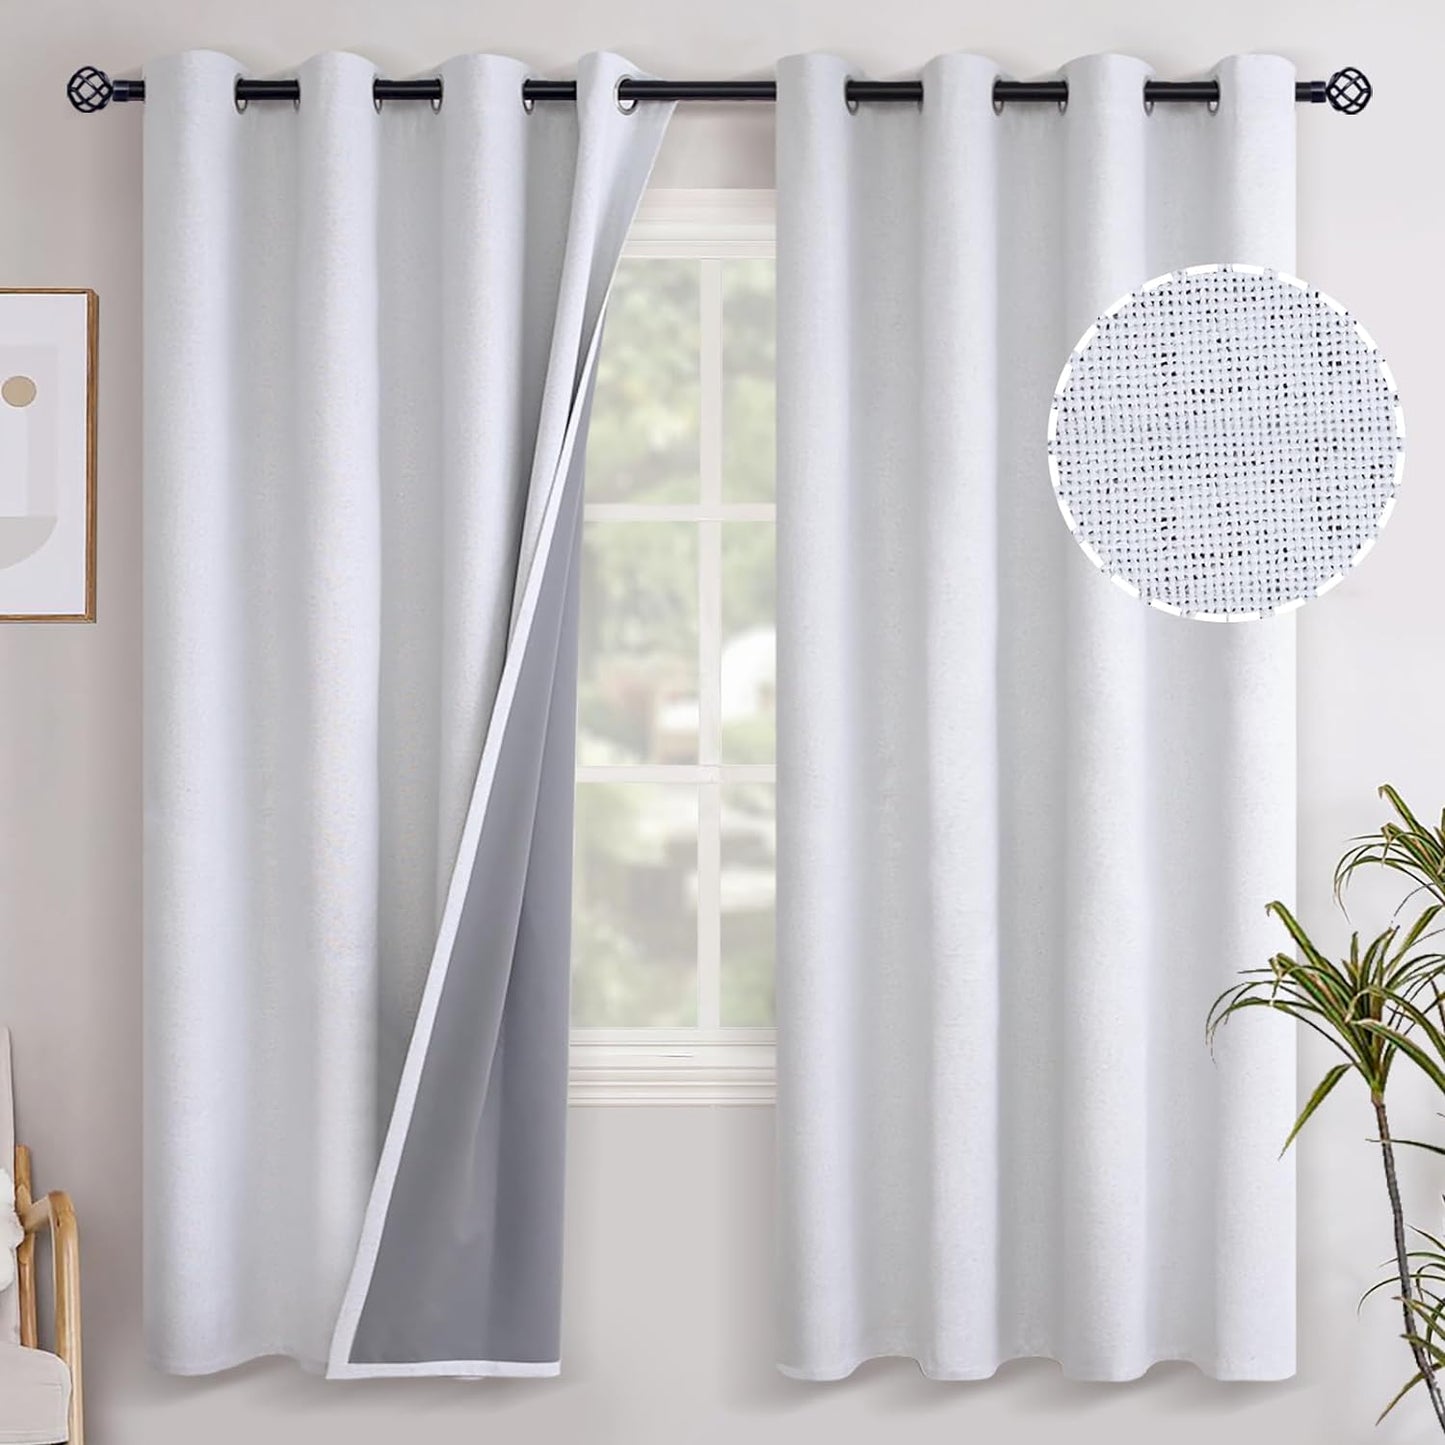 Youngstex Linen Blackout Curtains 63 Inch Length, Grommet Darkening Bedroom Curtains Burlap Linen Window Drapes Thermal Insulated for Basement Summer Heat, 2 Panels, 52 X 63 Inch, Beige  YoungsTex White 52W X 72L 